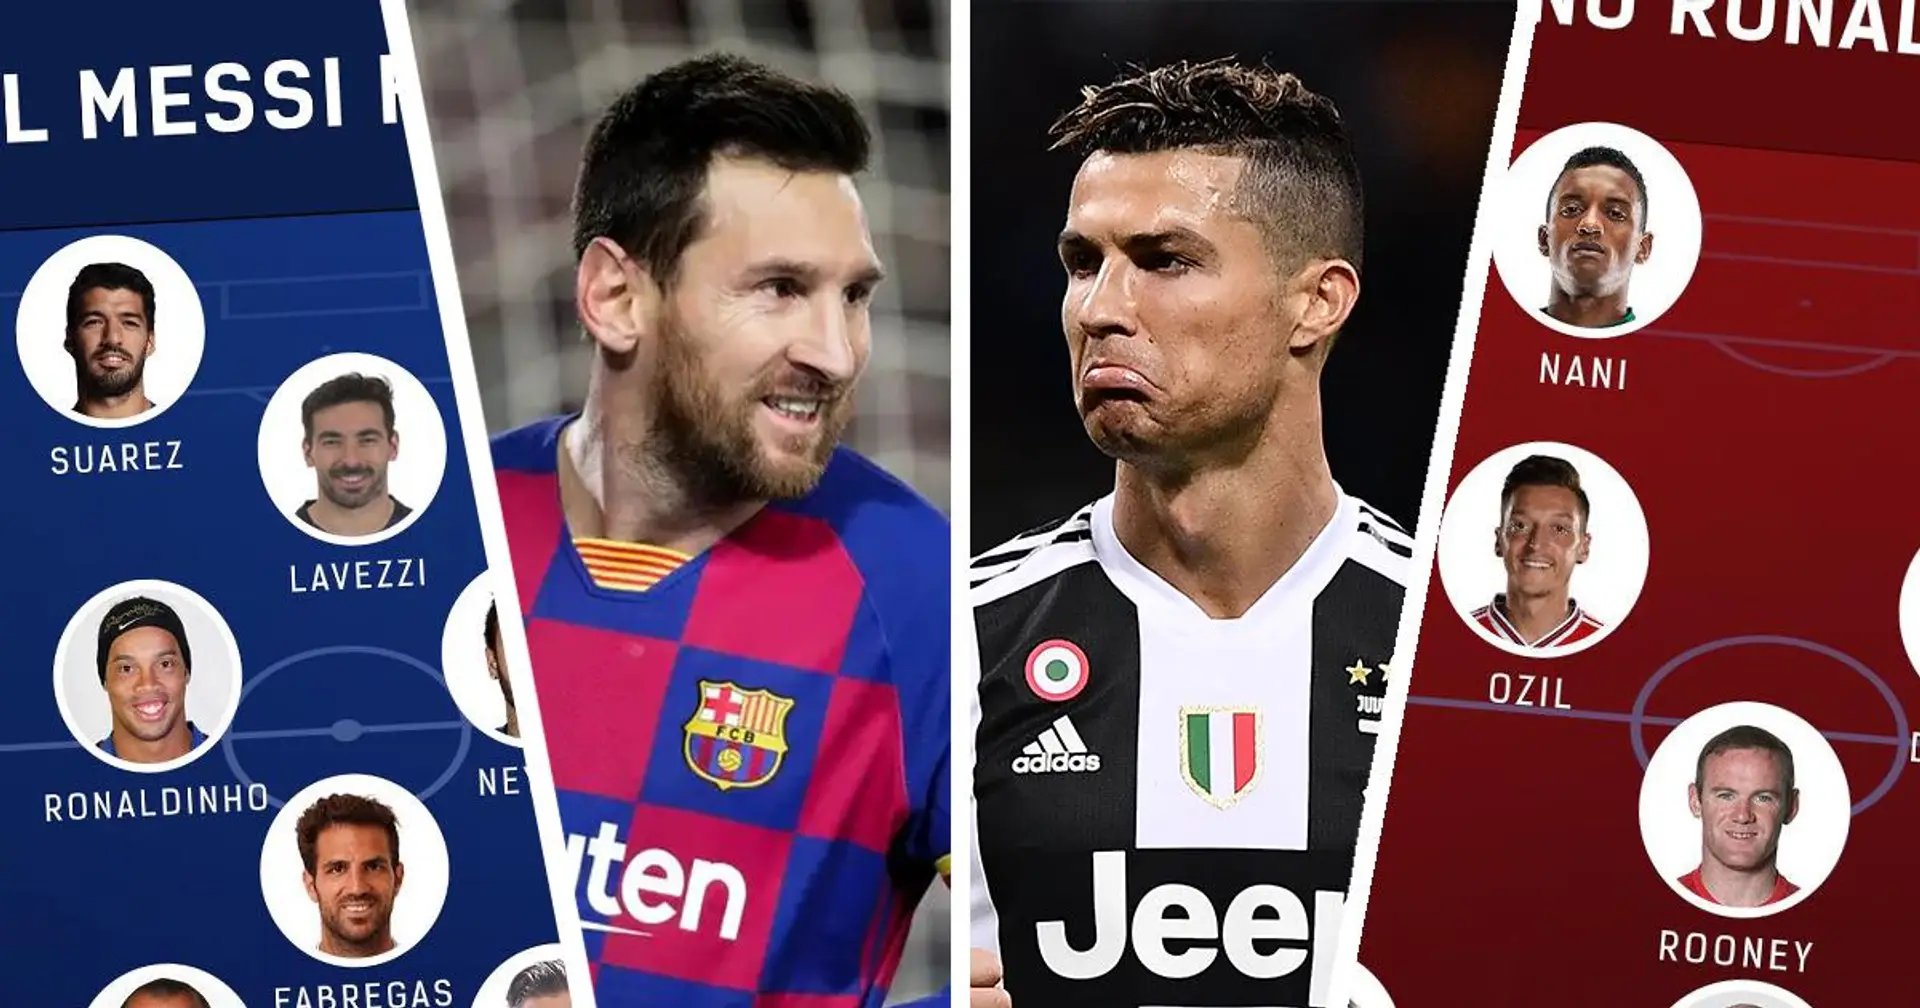 Messi's friends XI vs Ronaldo's friends XI is a easy win for the Argentine